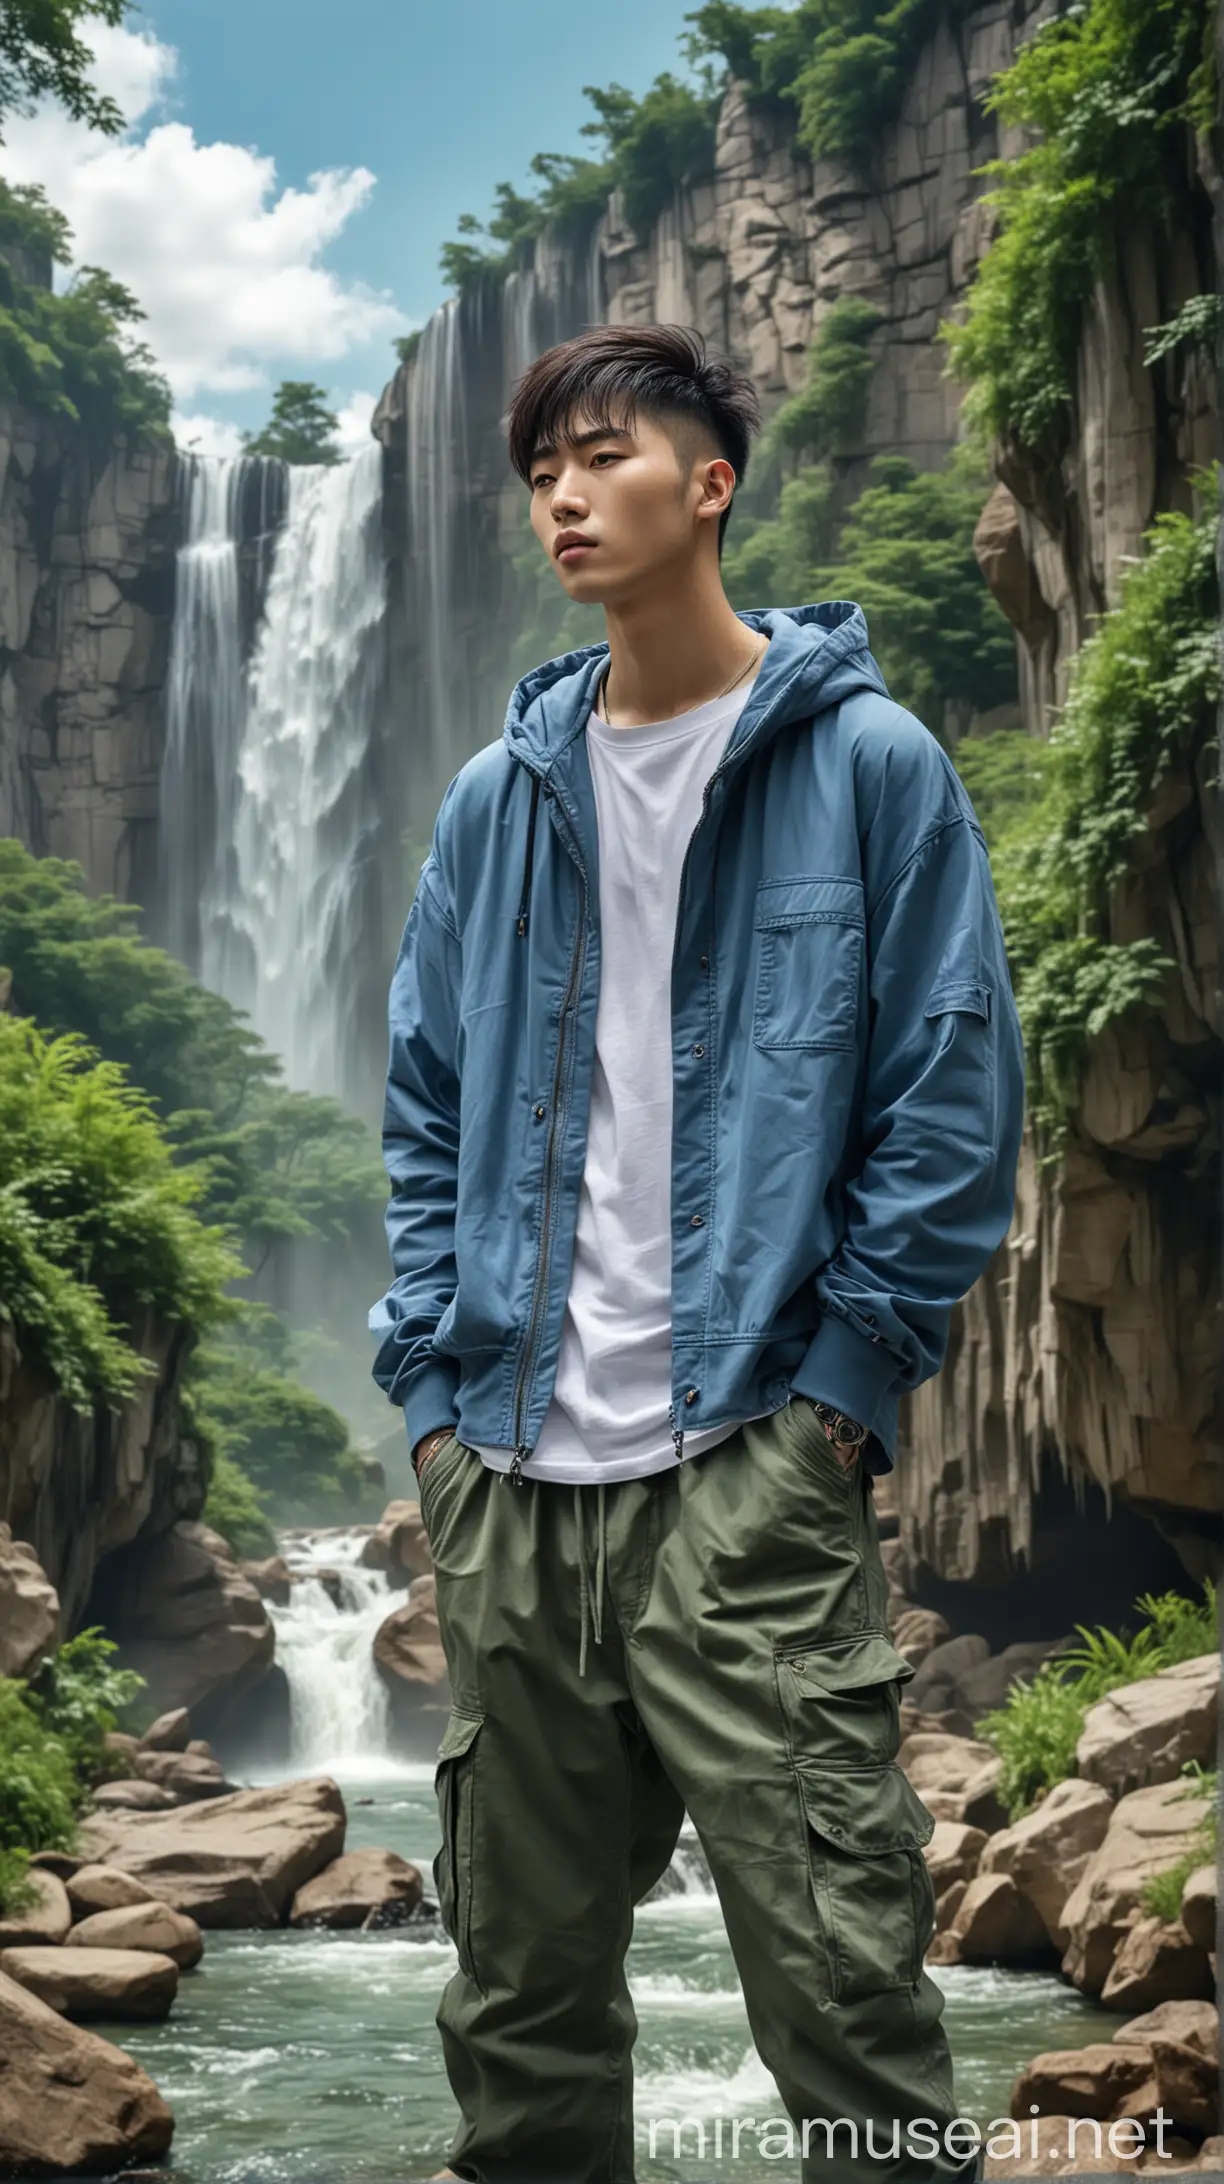 Stylish Korean Man Embracing Natures Beauty by the Waterfall